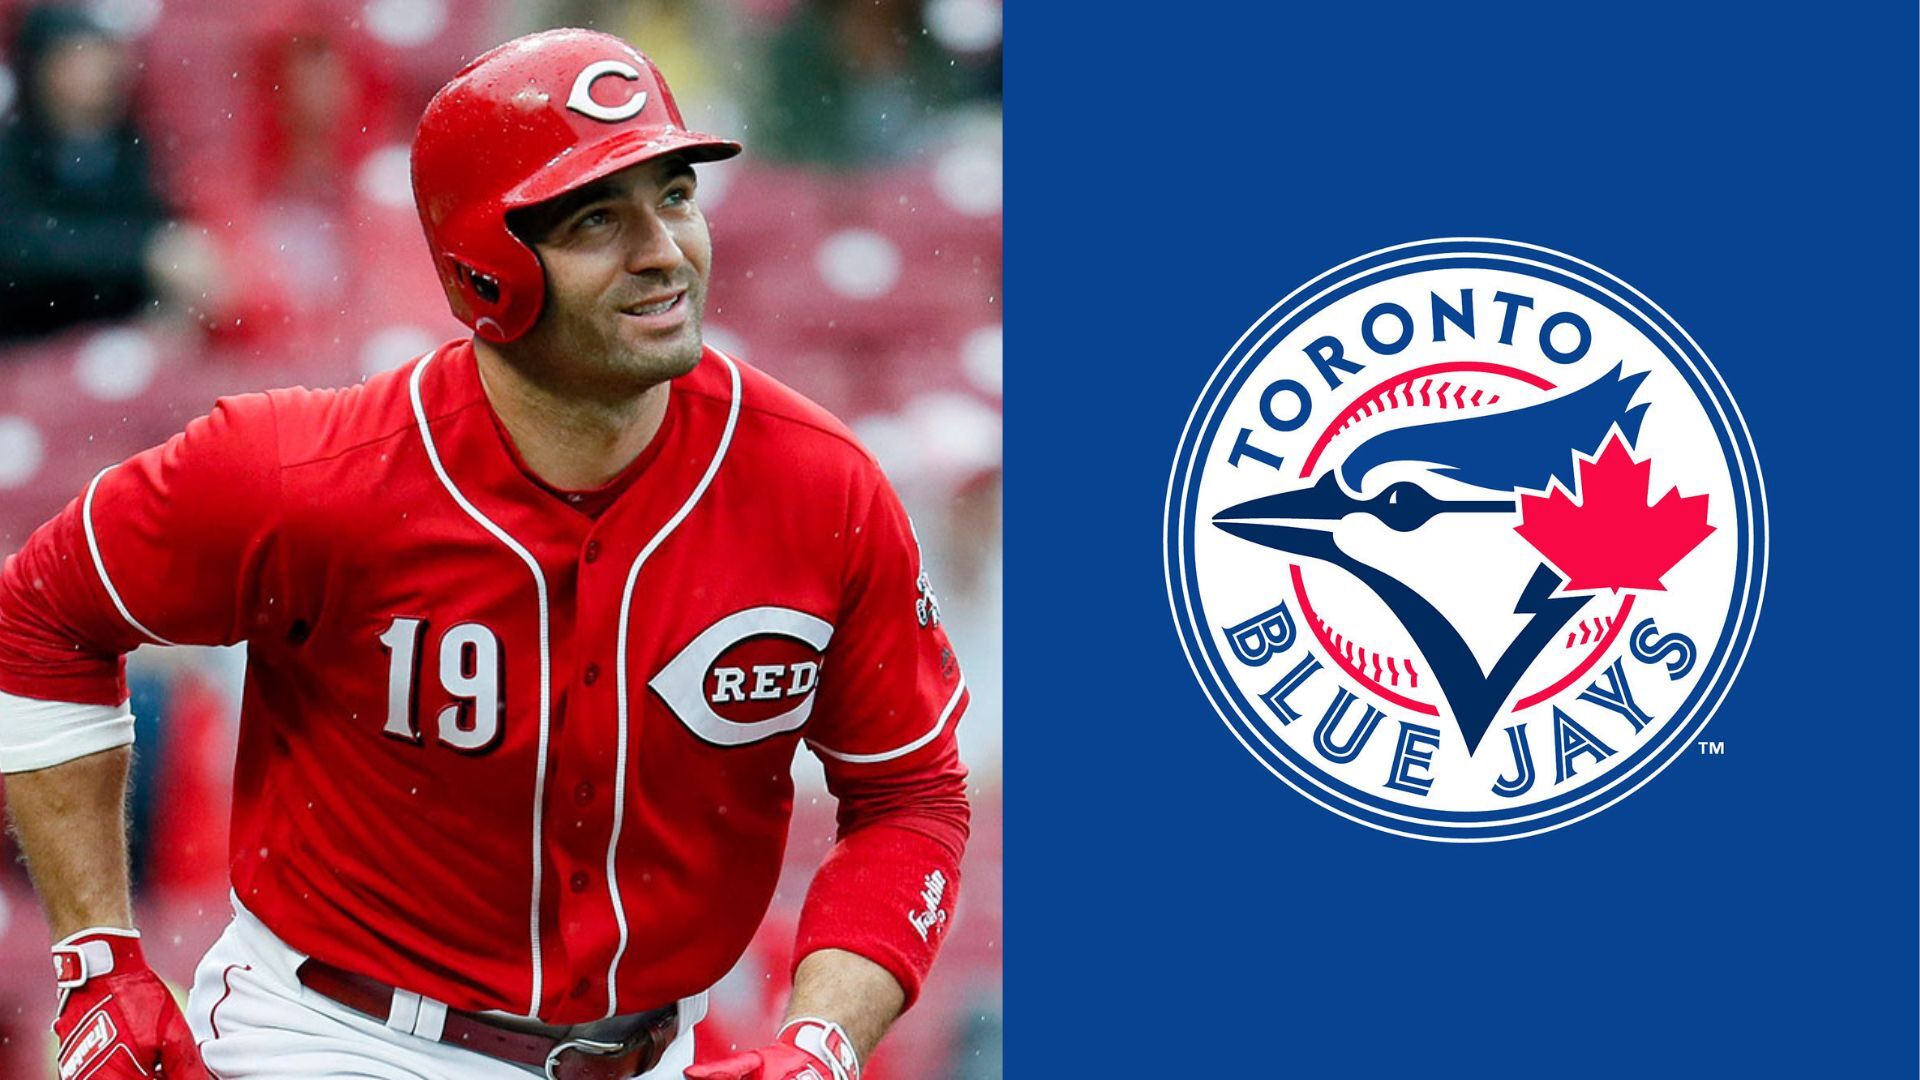 Toronto born Joey Votto signs with the Blue Jays